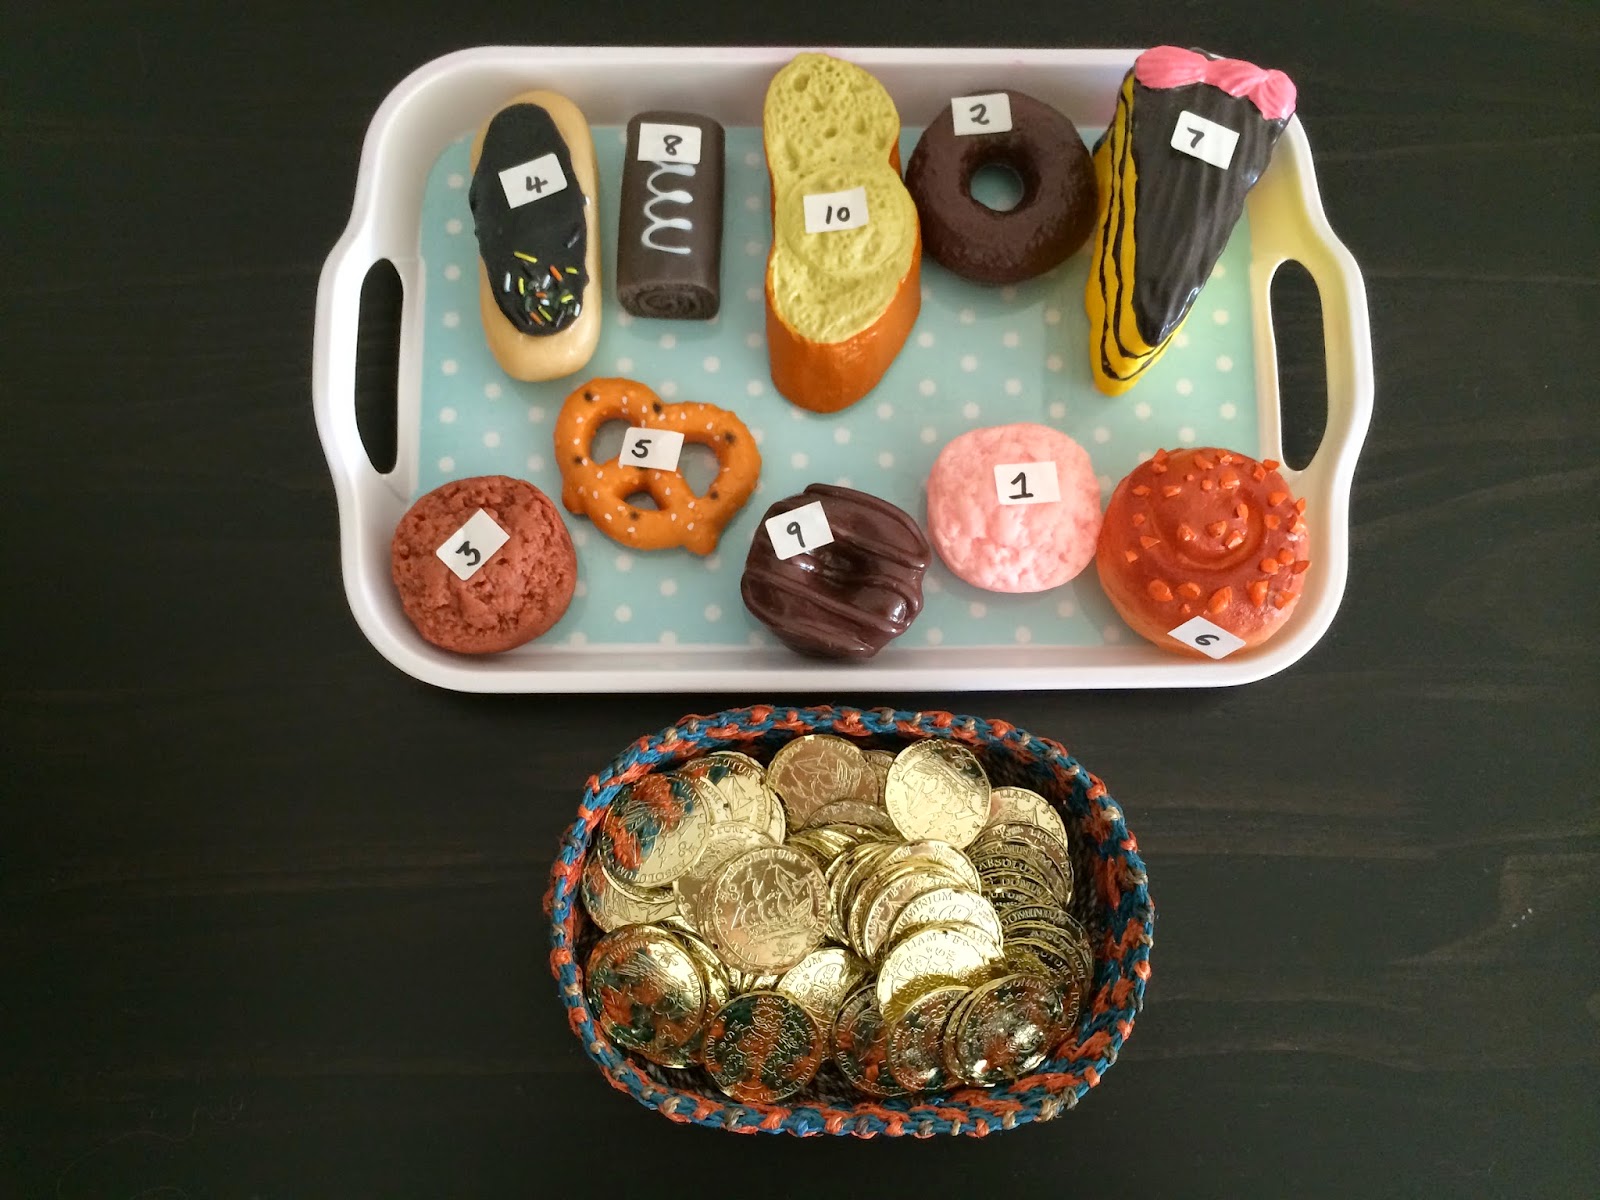 A number bakery scene of pastries and coins with different pricing from above